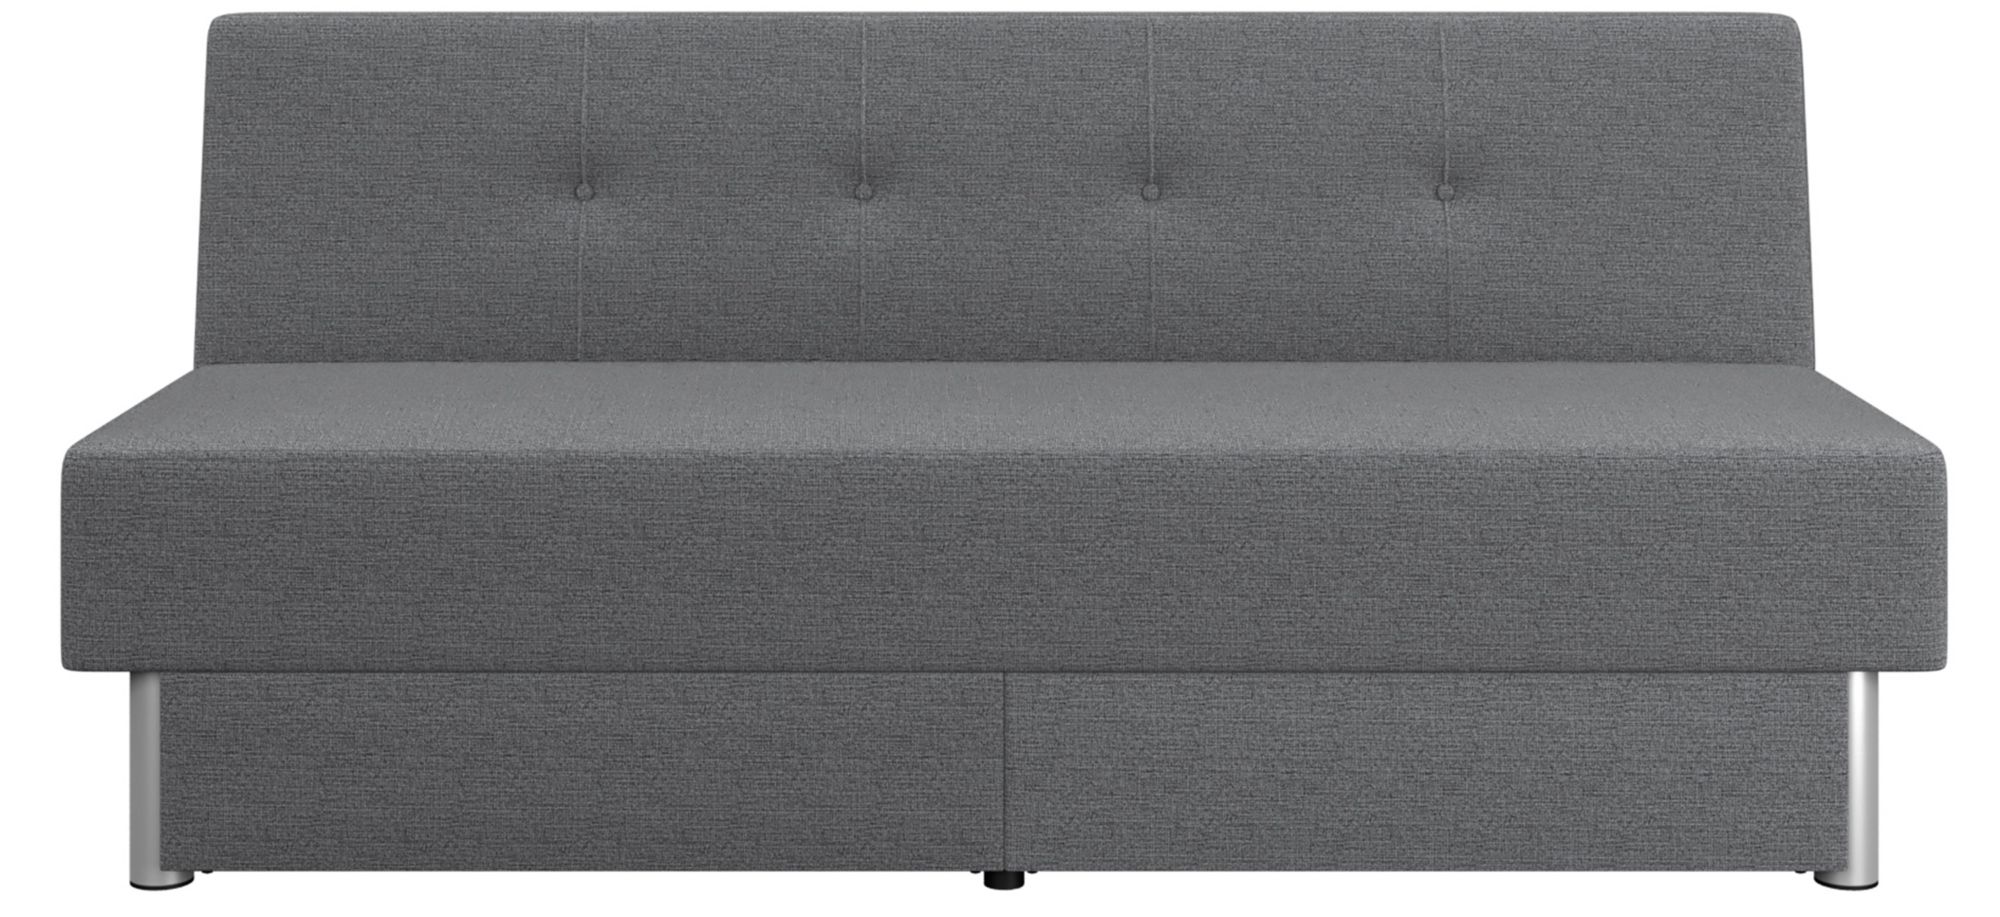 Waterford Convertible Futon in Charcoal by Lifestyle Solutions